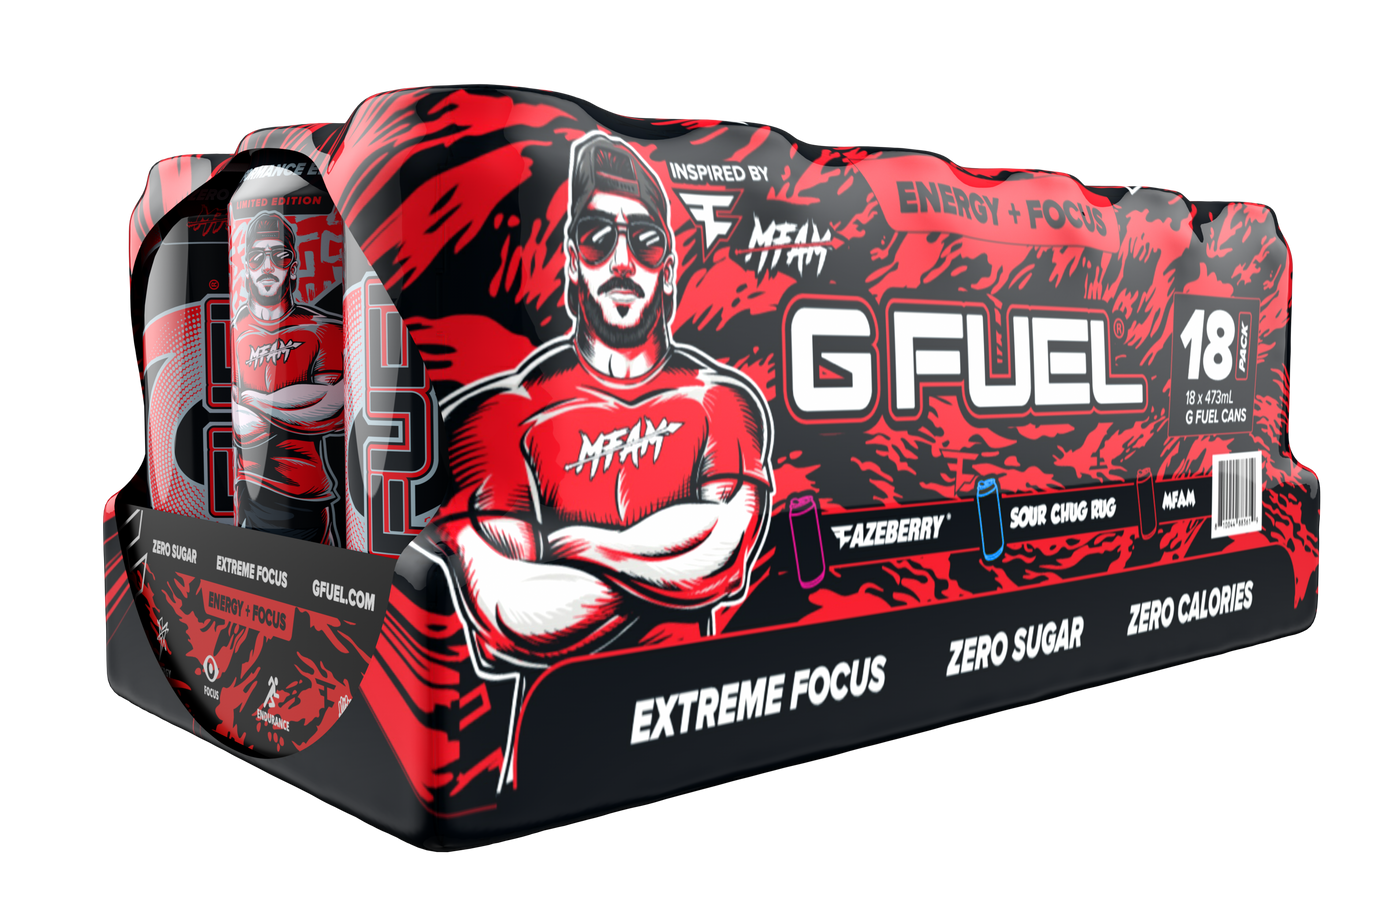 G FUEL's FaZe Clan Variety Pack is a Sam's Club-exclusive and contains 6 cans of each of the following flavors: MFAM Punch (NICKMERCS' first G FUEL flavor), FaZe Clan-inspired FaZeberry, and FaZe Rug-inspired Sour Blue Chug Rug.